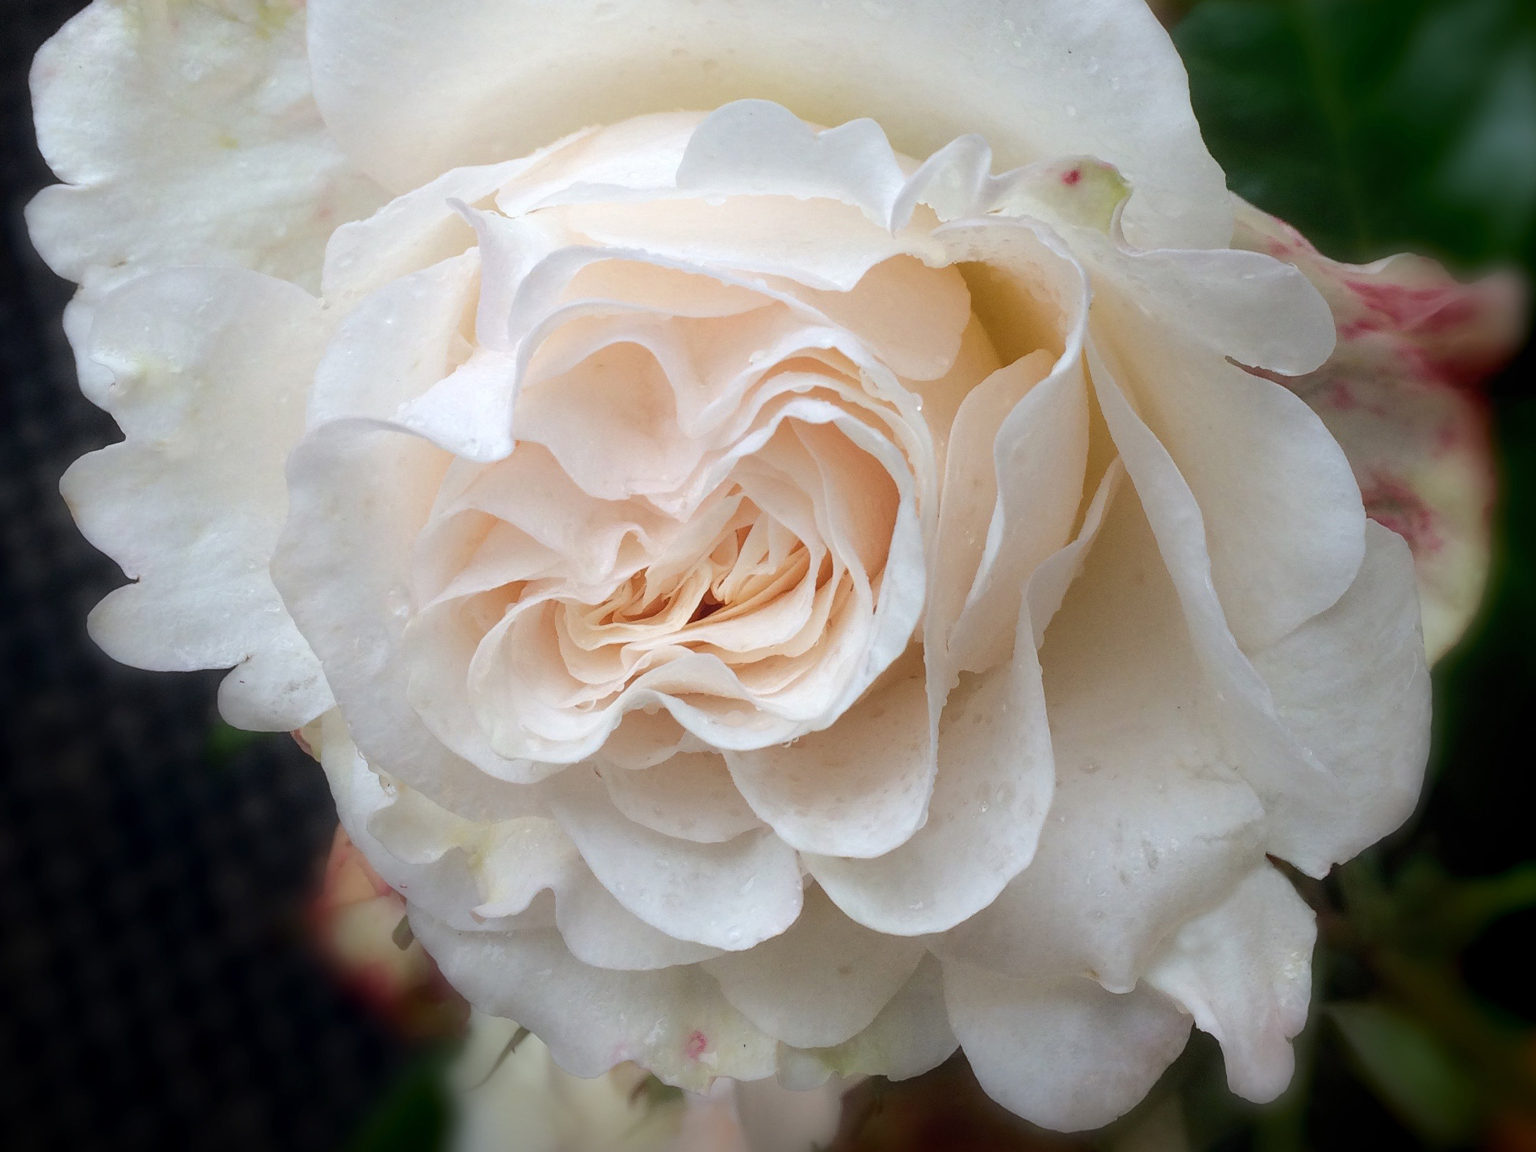 The rose blooms at Rolls-Royce headquarters in Goodwood, West Sussex, England.